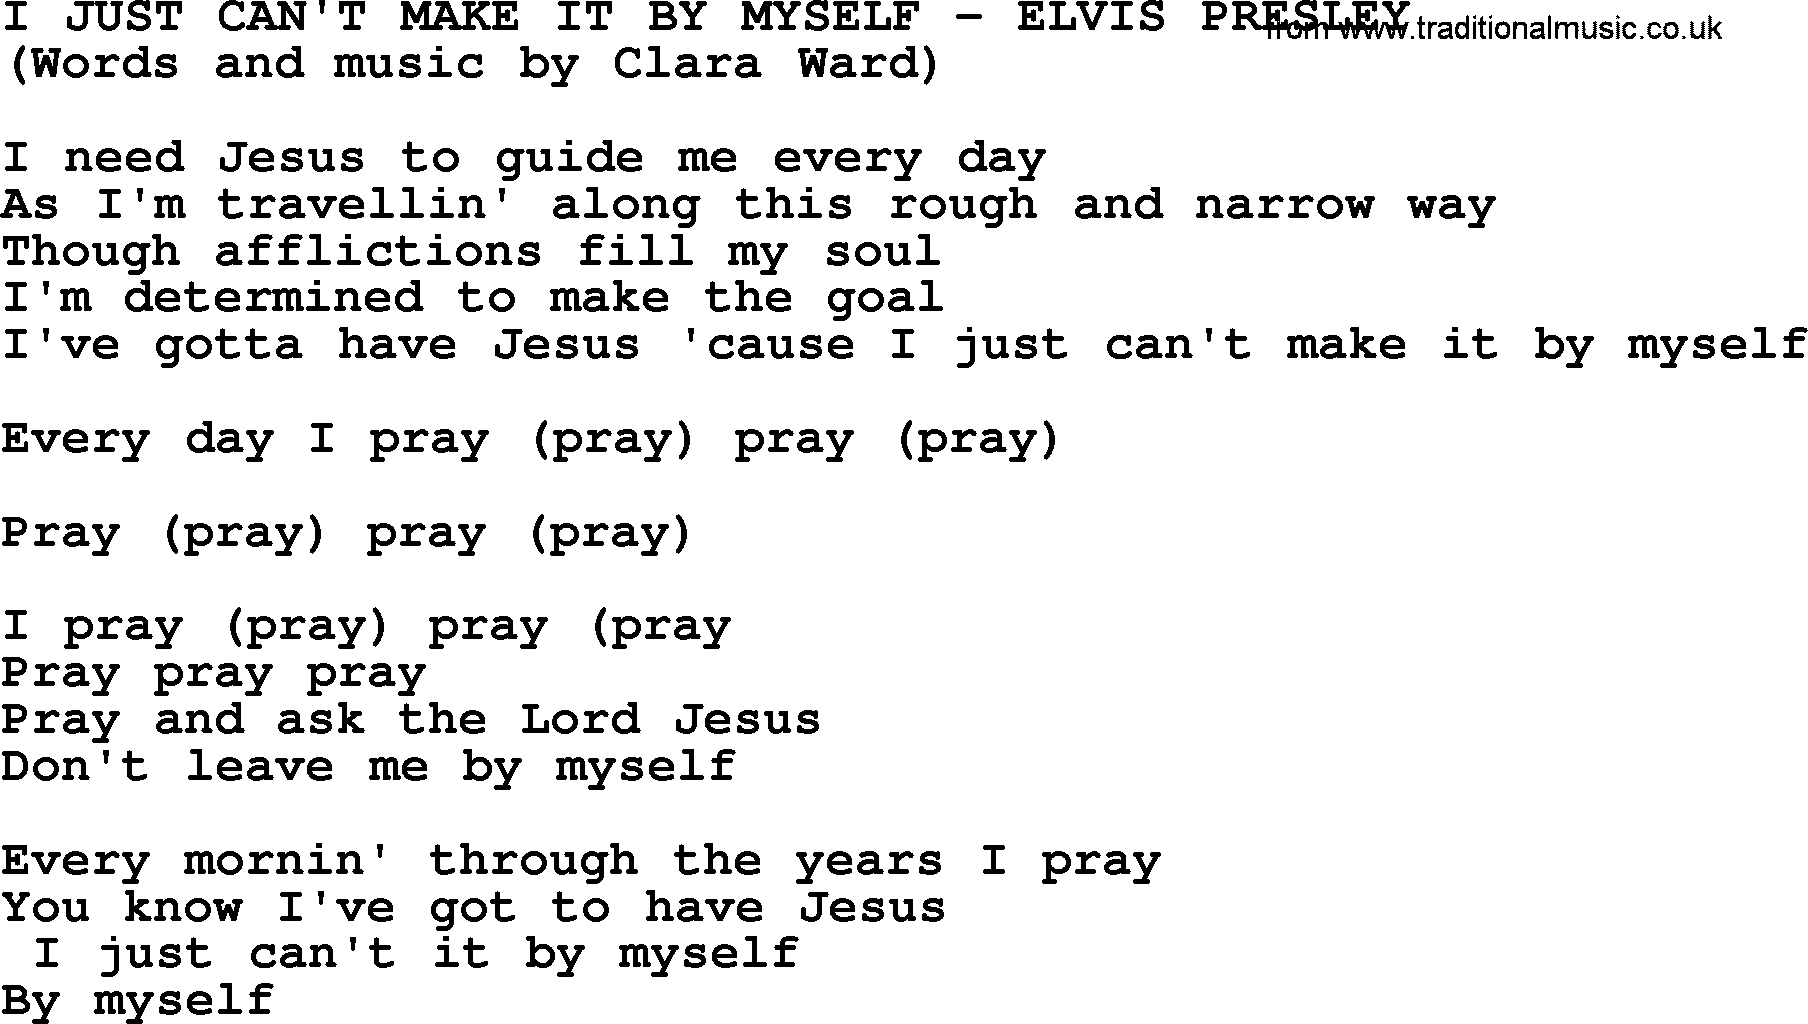 Elvis Presley song: I Just Can't Make It By Myself lyrics